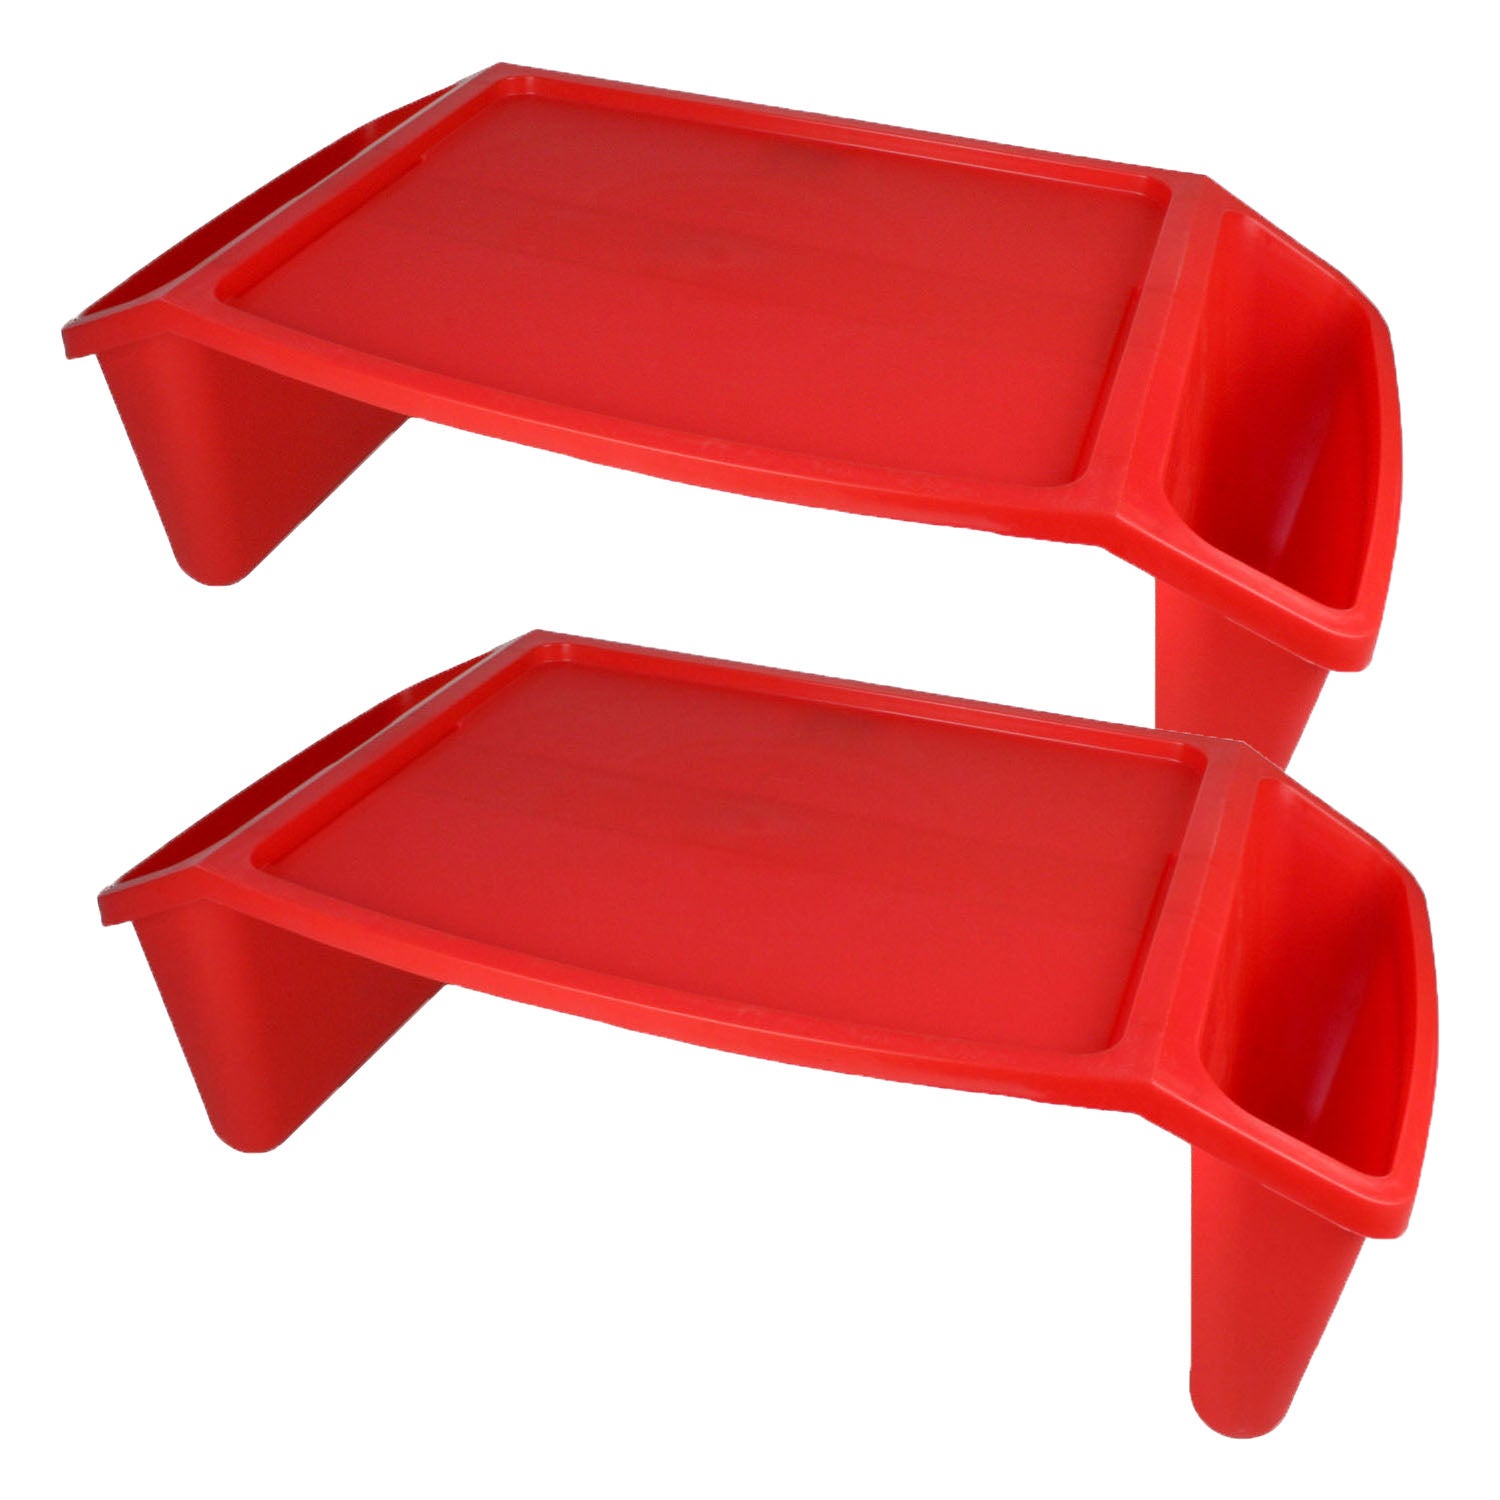 Lap Tray, Red, Pack of 2 - A1 School Supplies